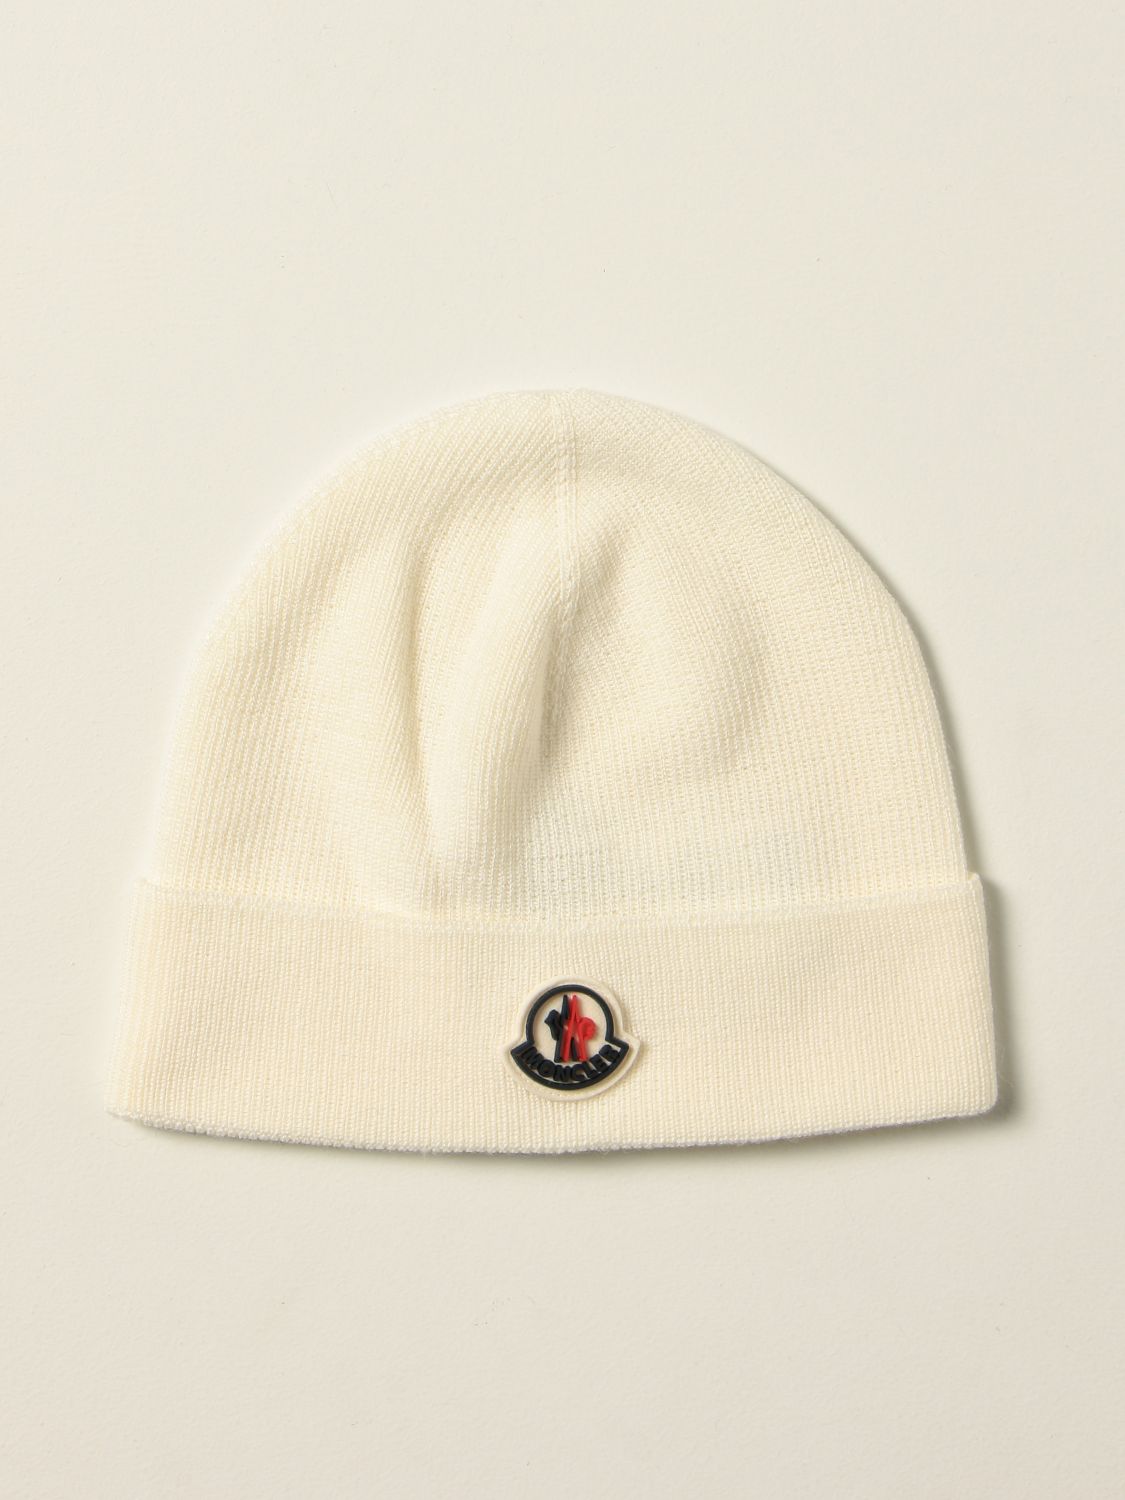 Hat Moncler: Moncler beanie hat in wool blend yellow cream 1